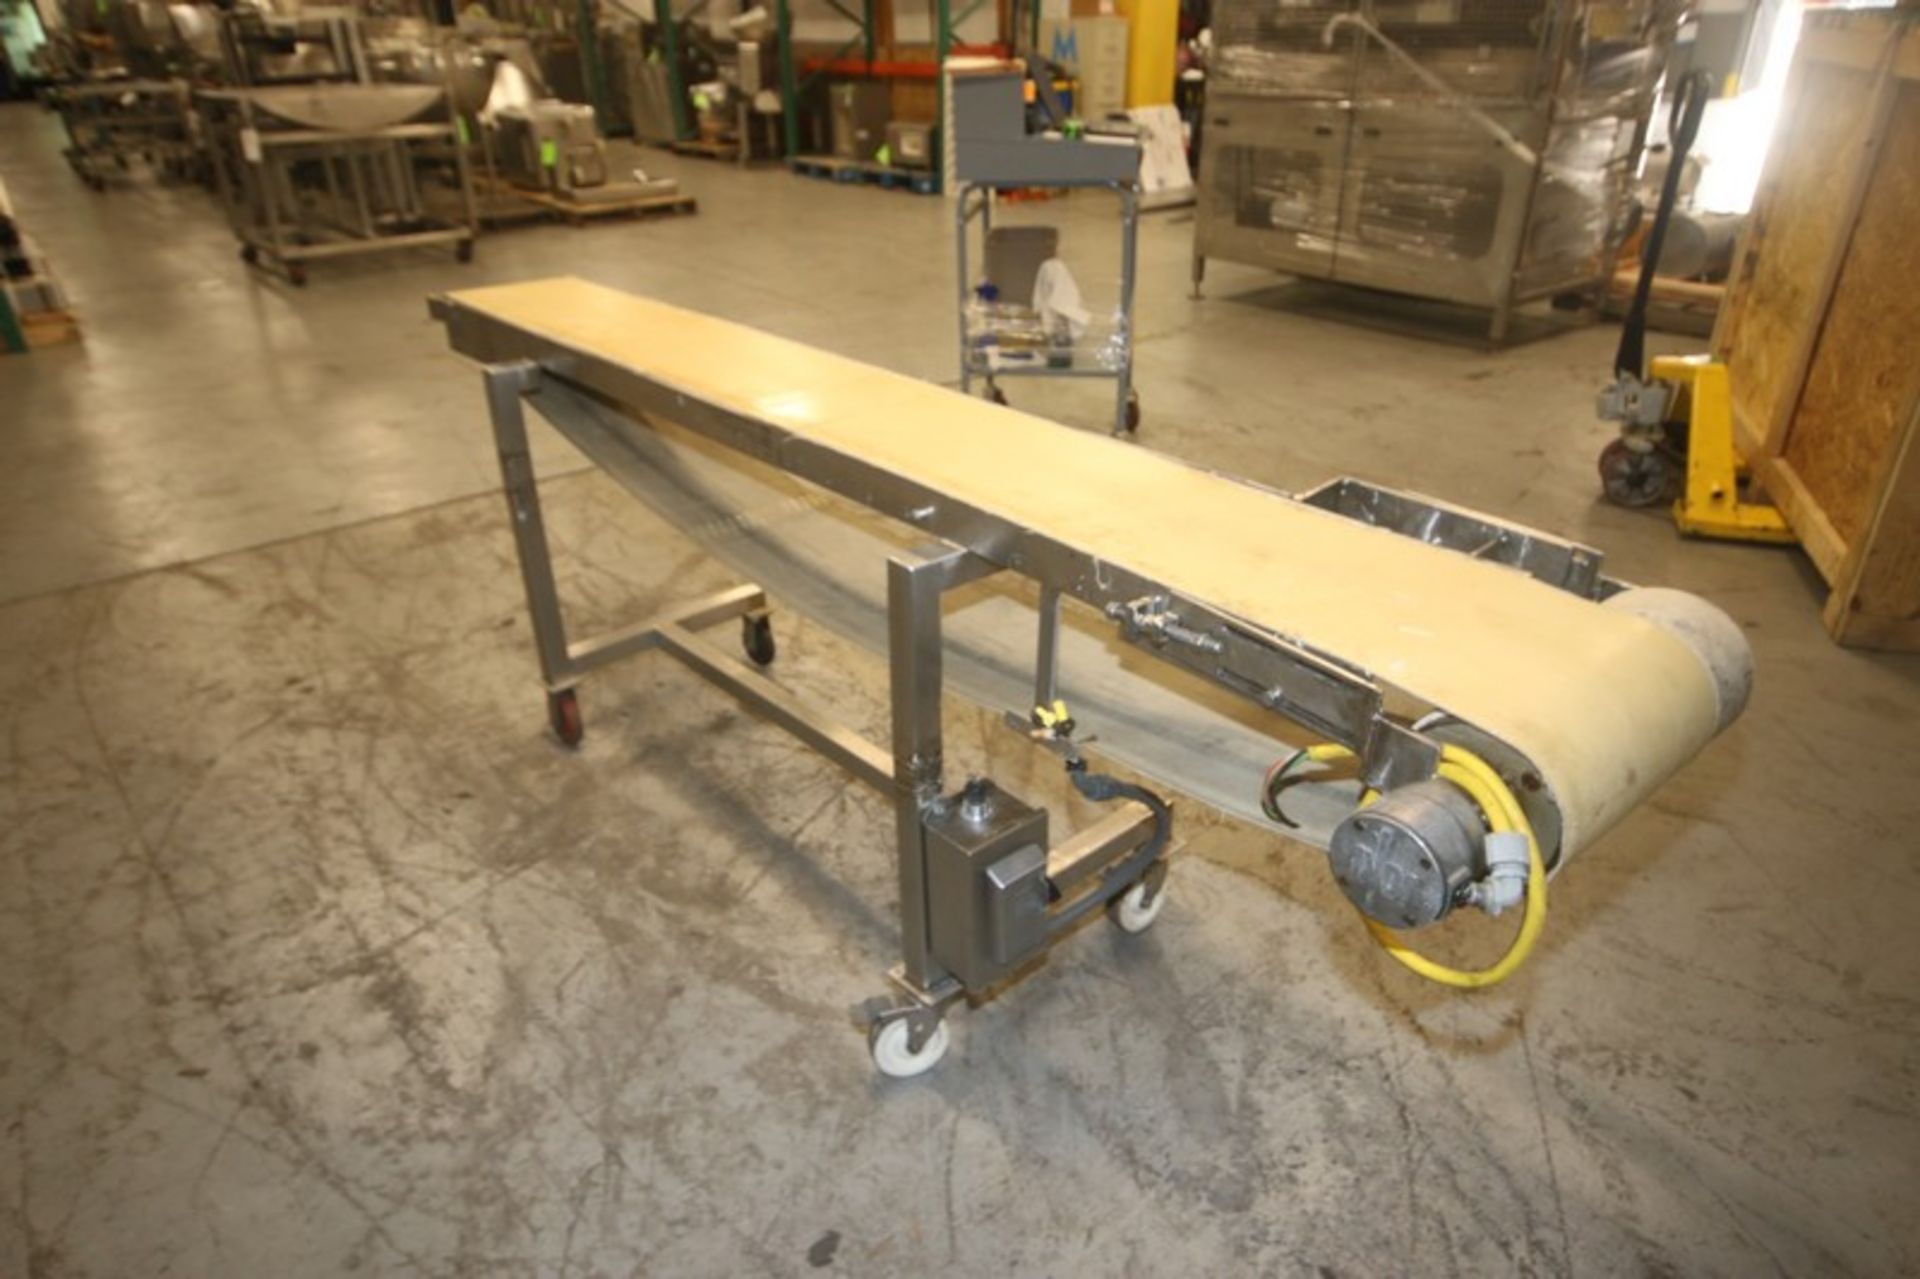 Straight Section of S/S Conveyor, with Aprox. 12" W Belt, Overall Dims.: Aprox. 100" L x 24" W x 35" - Image 4 of 4